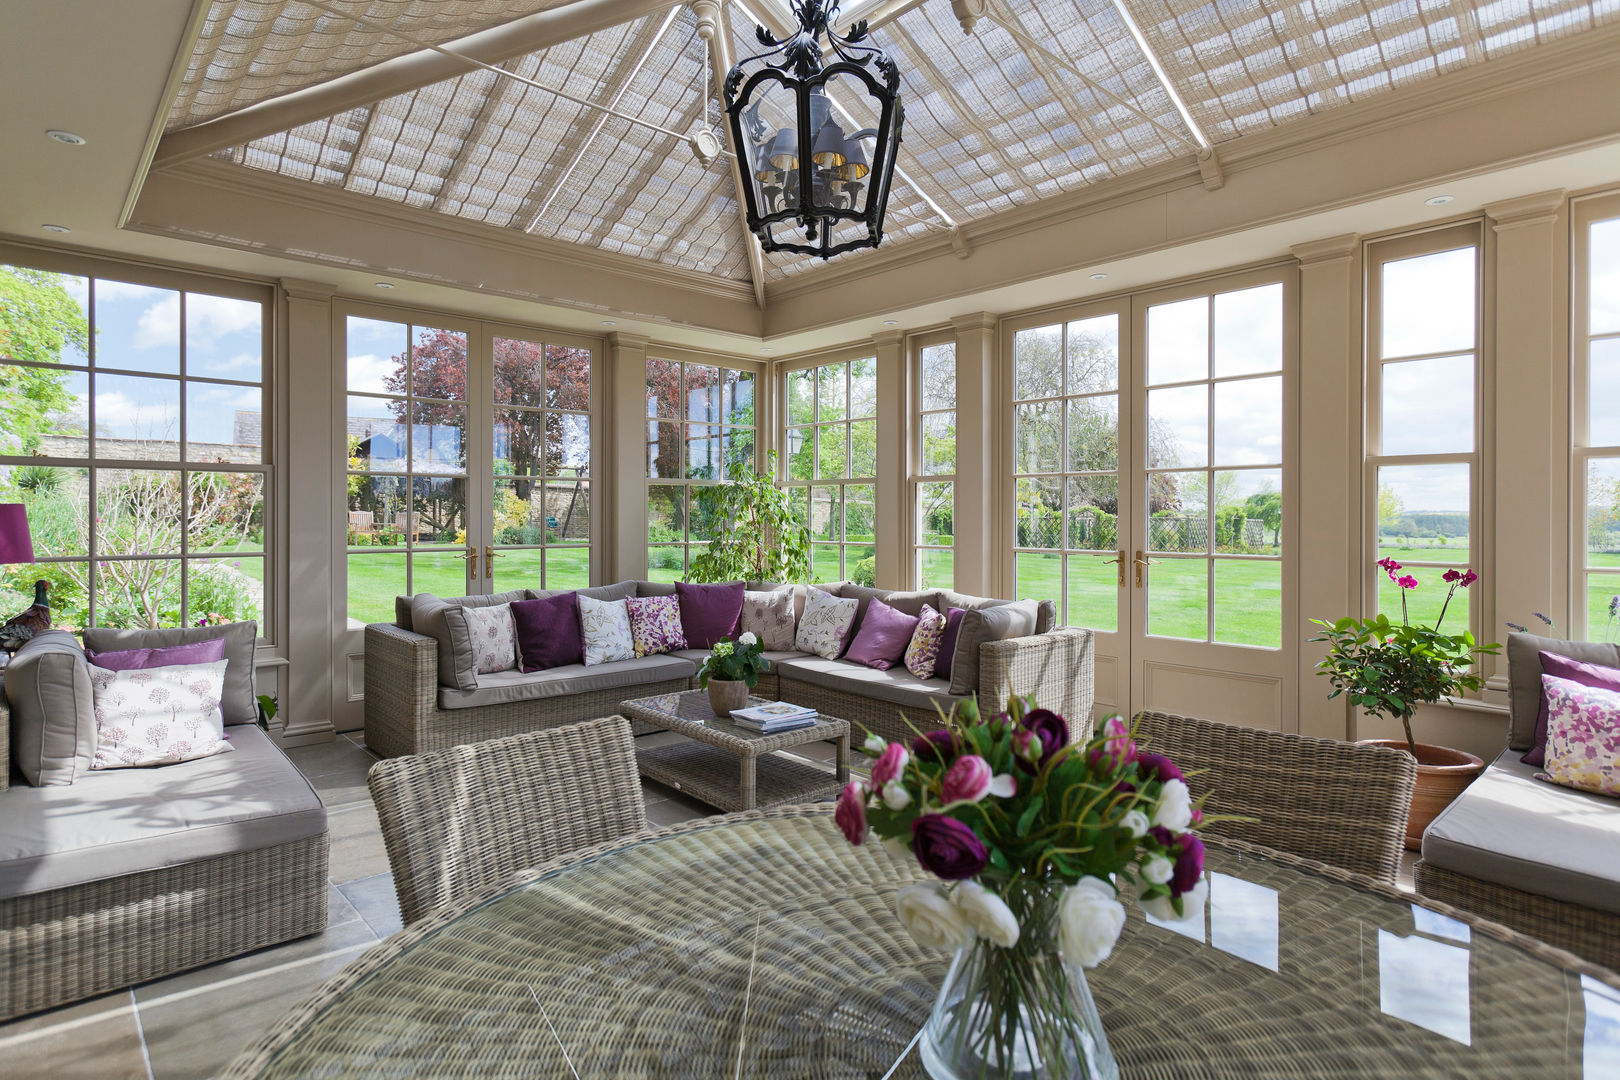 Orangery with Vertical Balanced Sliding Slashes Vale Garden Houses Classic style conservatory Wood Wood effect conservatory,orangery,garden room,outdoor,bespoke,timber,aluminium,glass,roof light,roof light